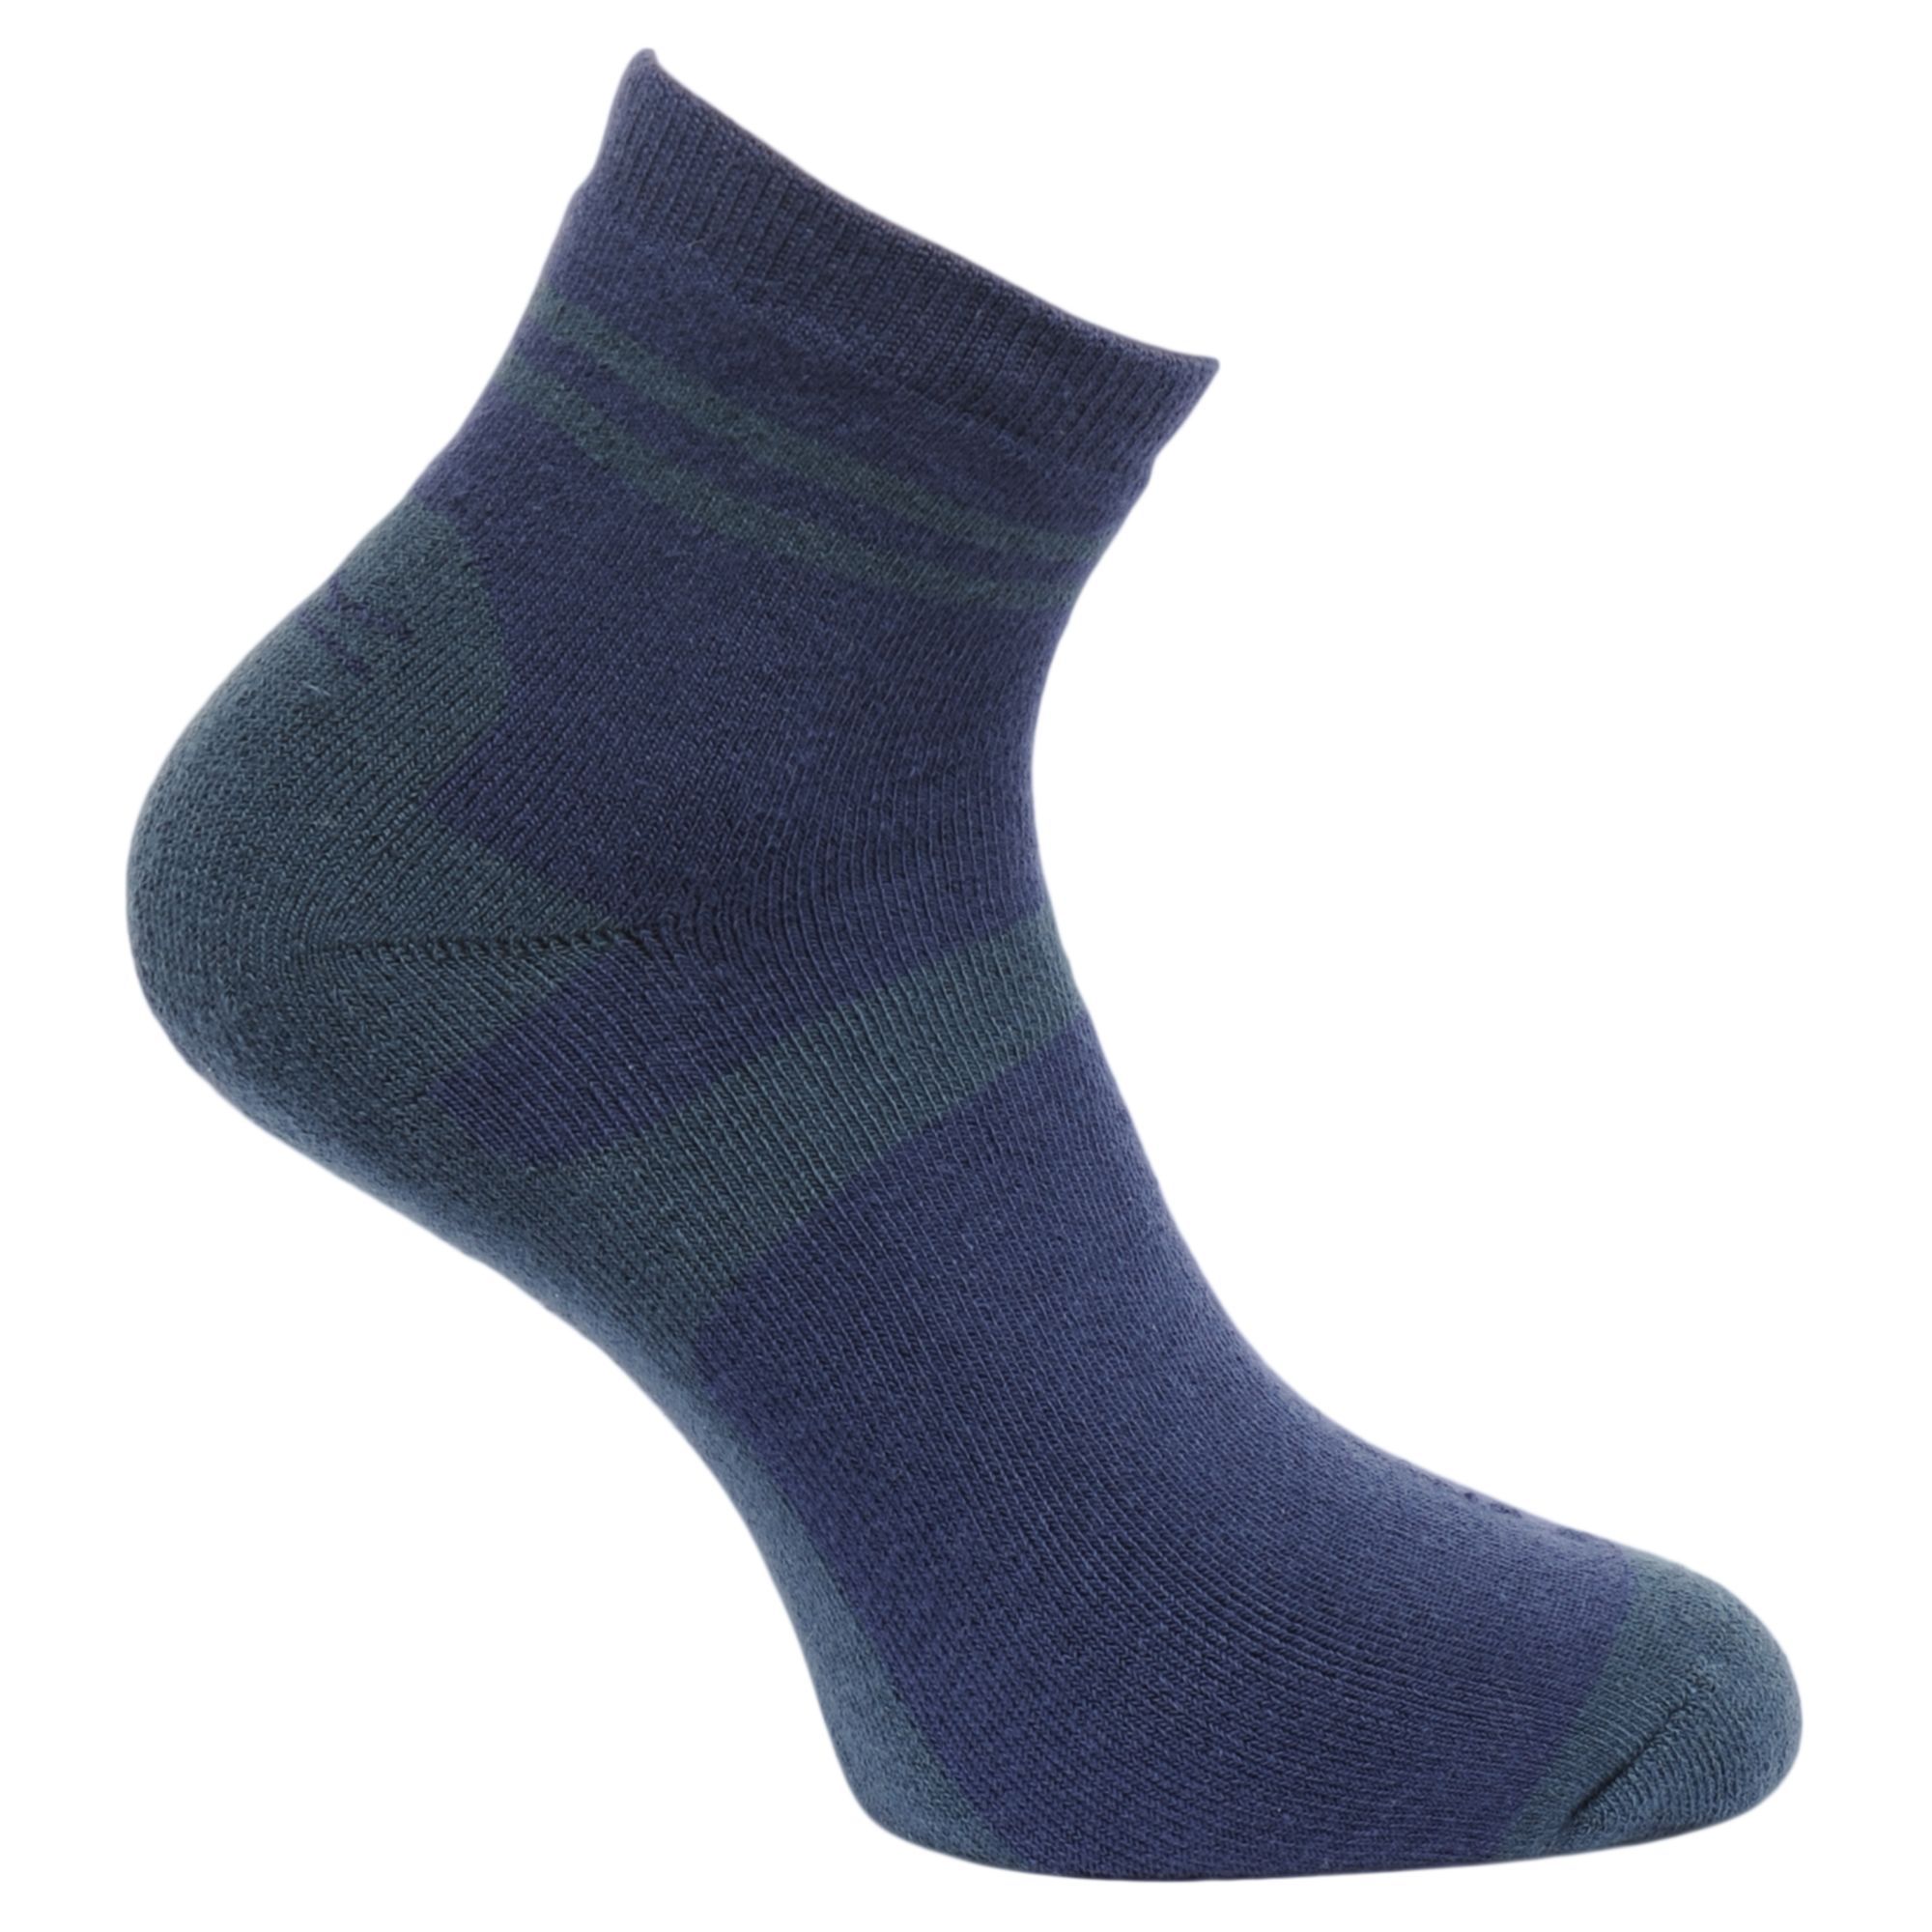 The mens 3 Season Heavyweight Trek & Trail Sock is anatomically designed to provide a high level of underfoot protection and durability.  properties to encourage last longing freshness. Ideal for walking, hiking and rambling in all but the coldest of weather. Polyester 97%, Elastane 3%.